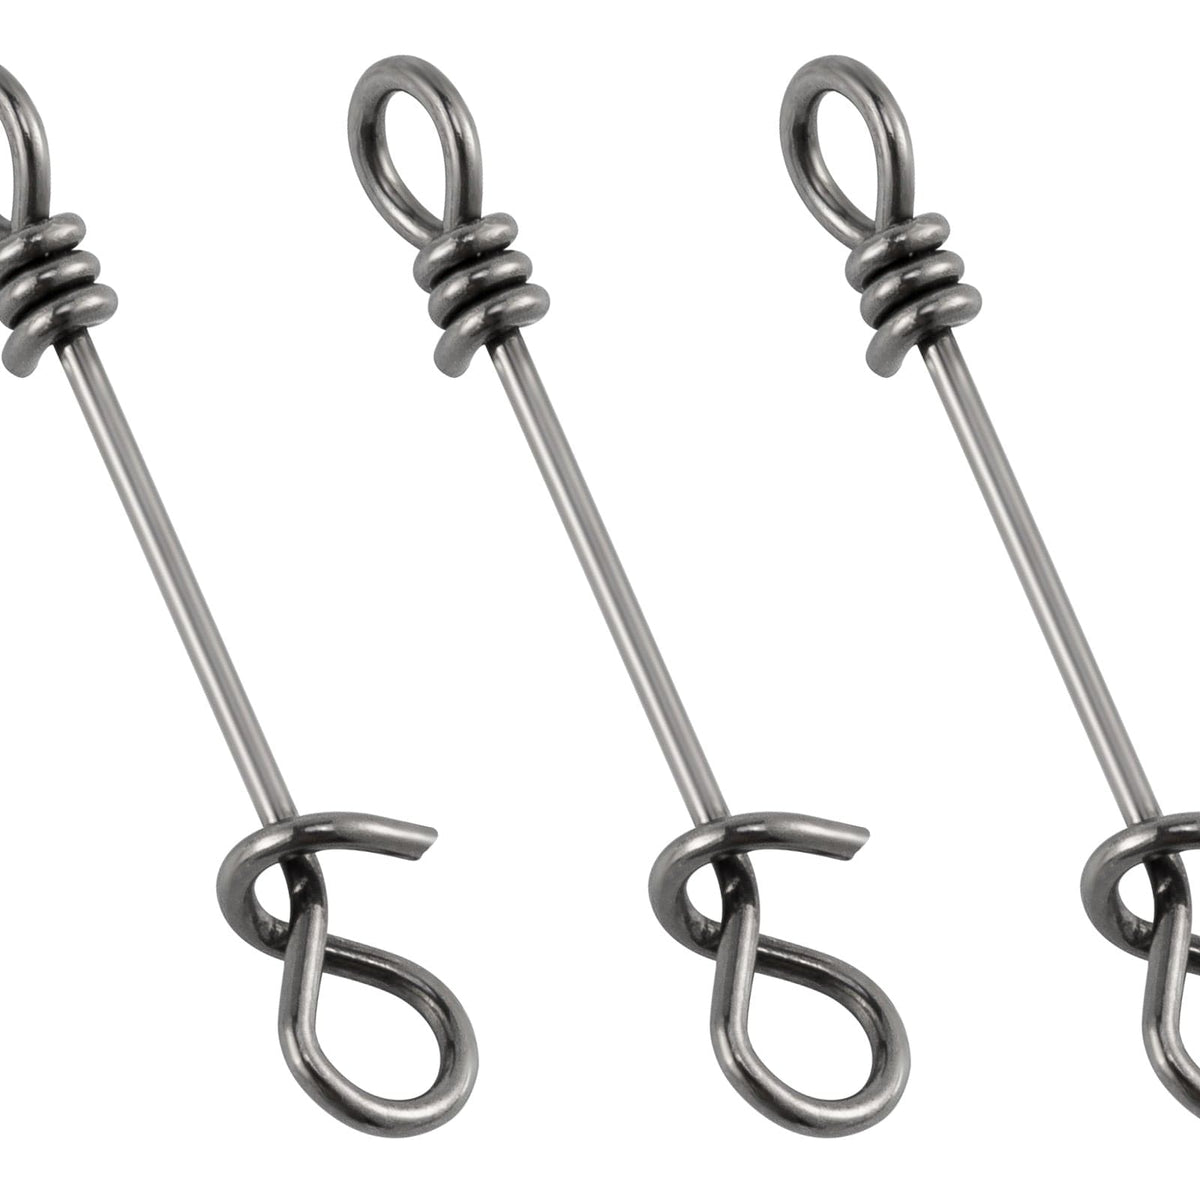 Dr.Fish Fishing Power Clips Stainless Steel Speed Clip Quick